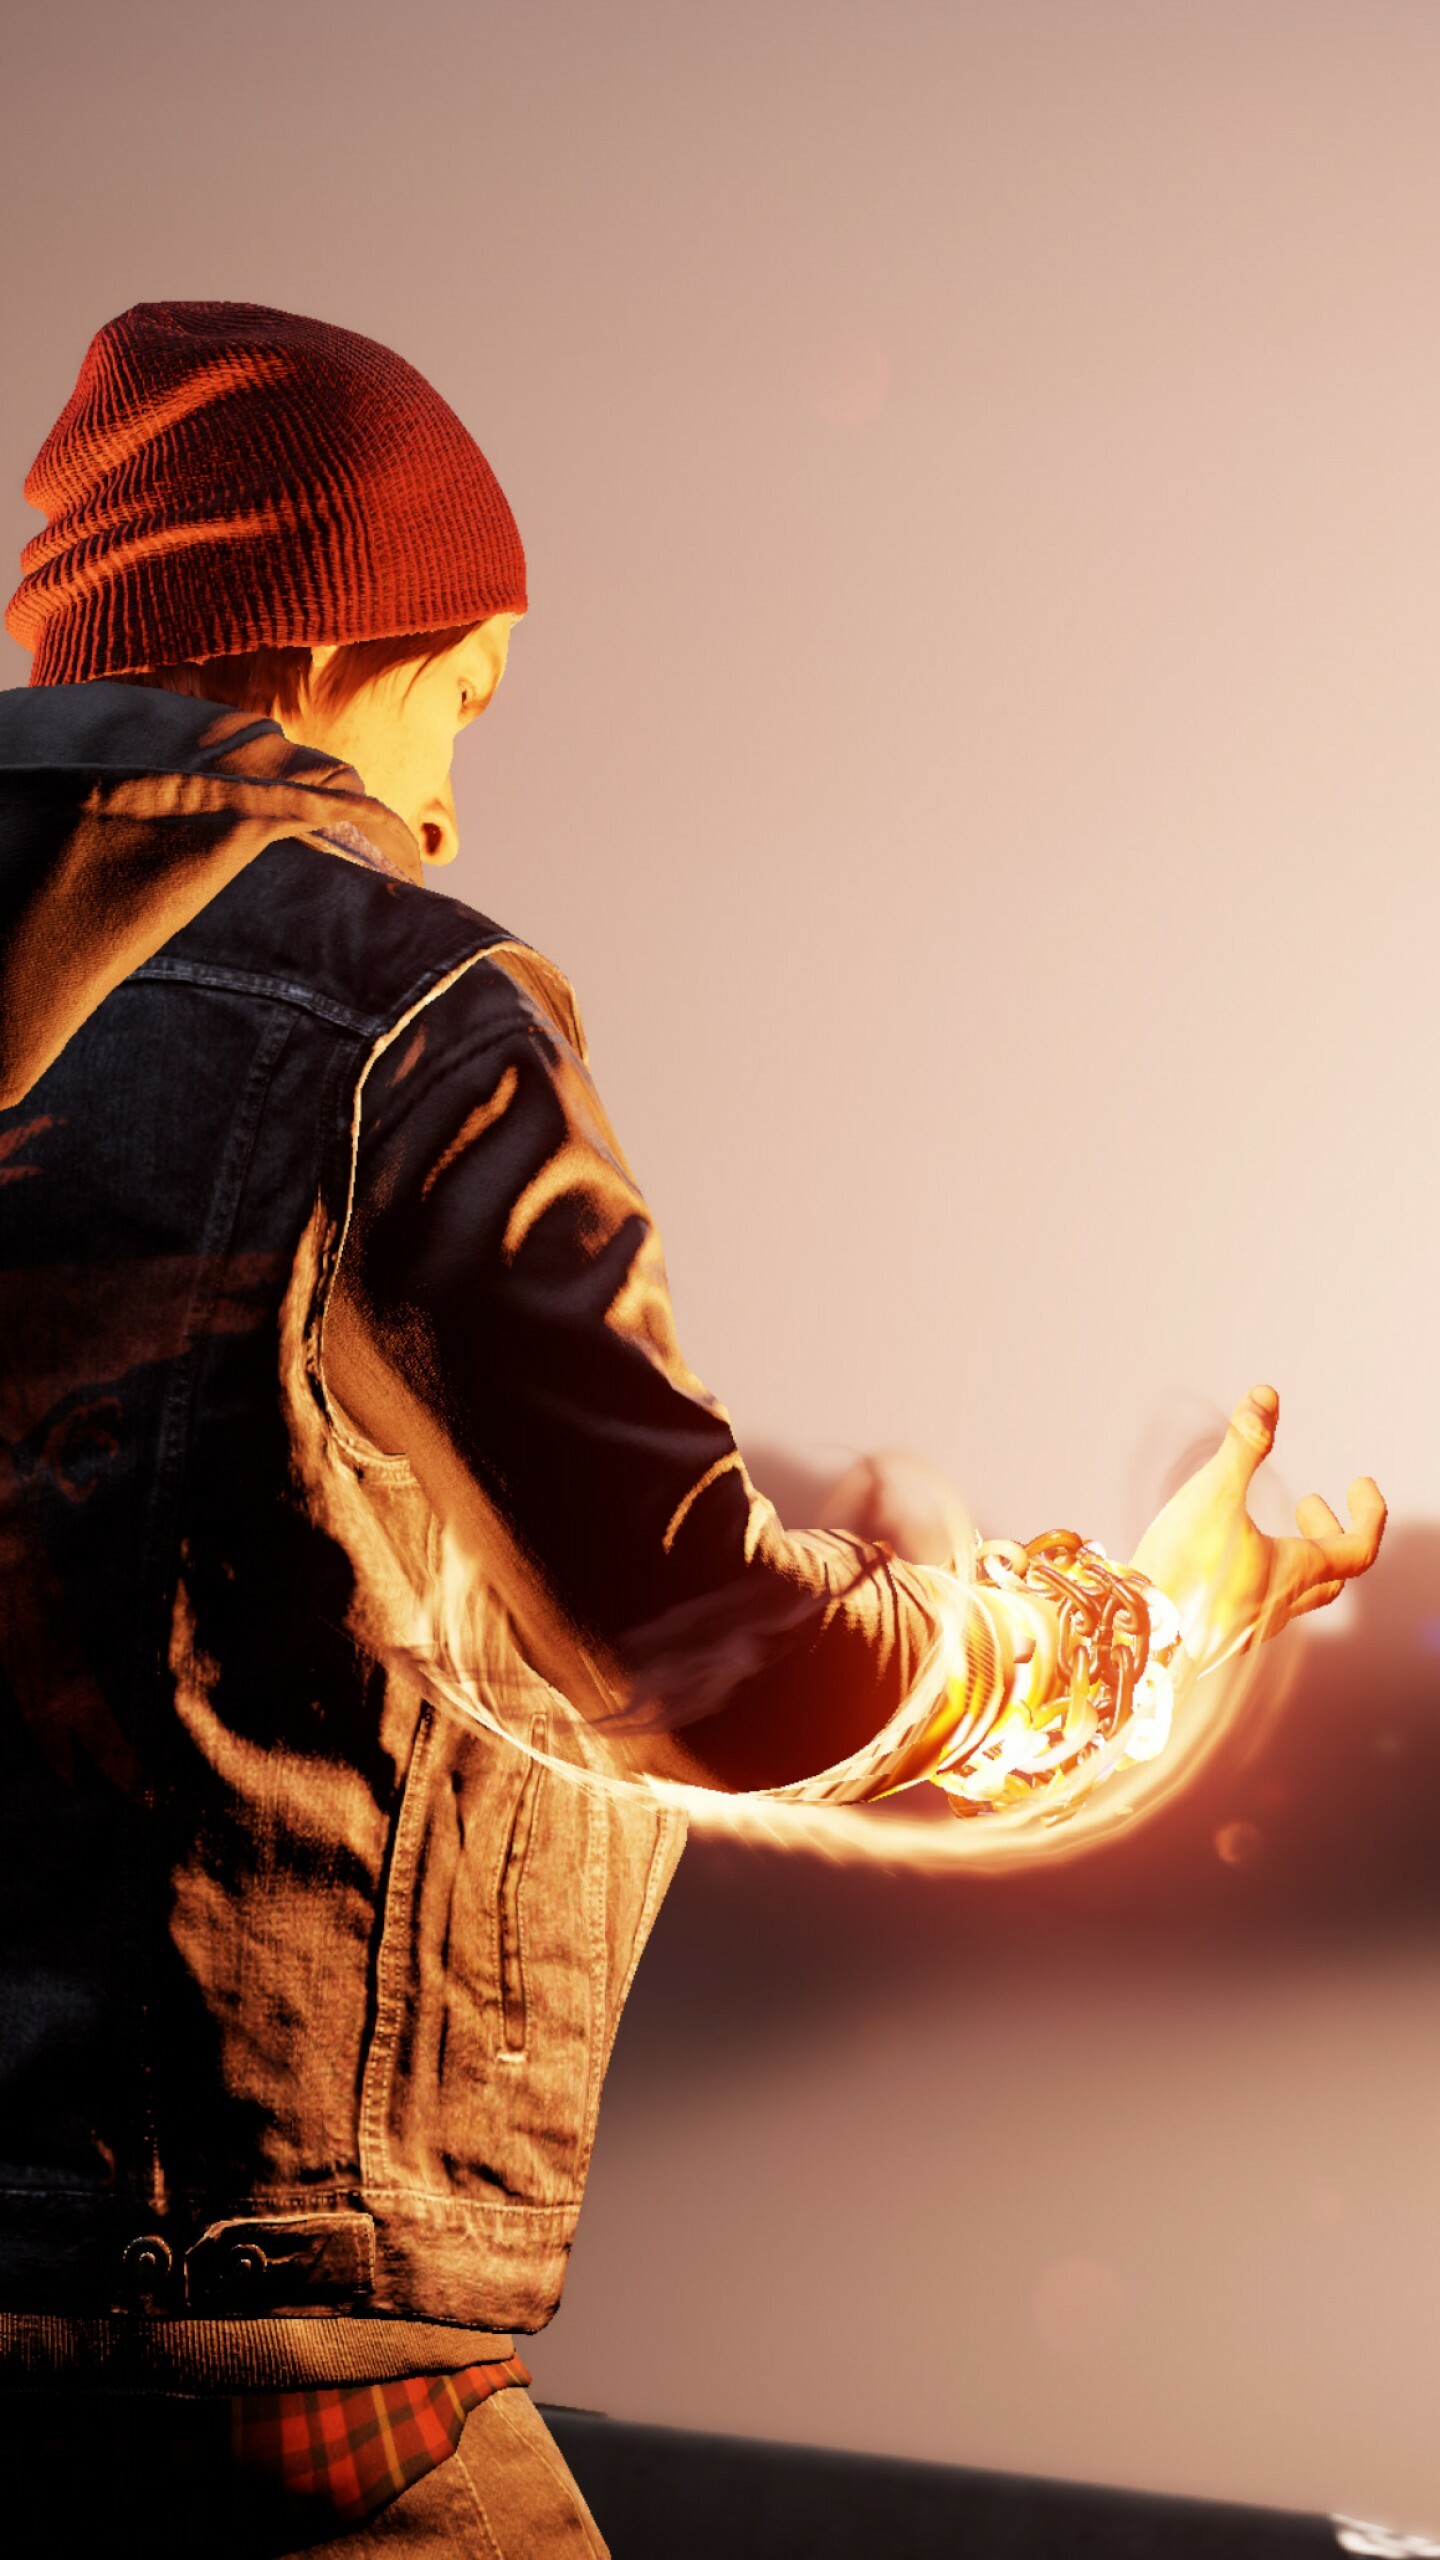 inFAMOUS: Second Son, The story follows protagonist Delsin Rowe fighting the Department of Unified Protection. 1440x2560 HD Wallpaper.